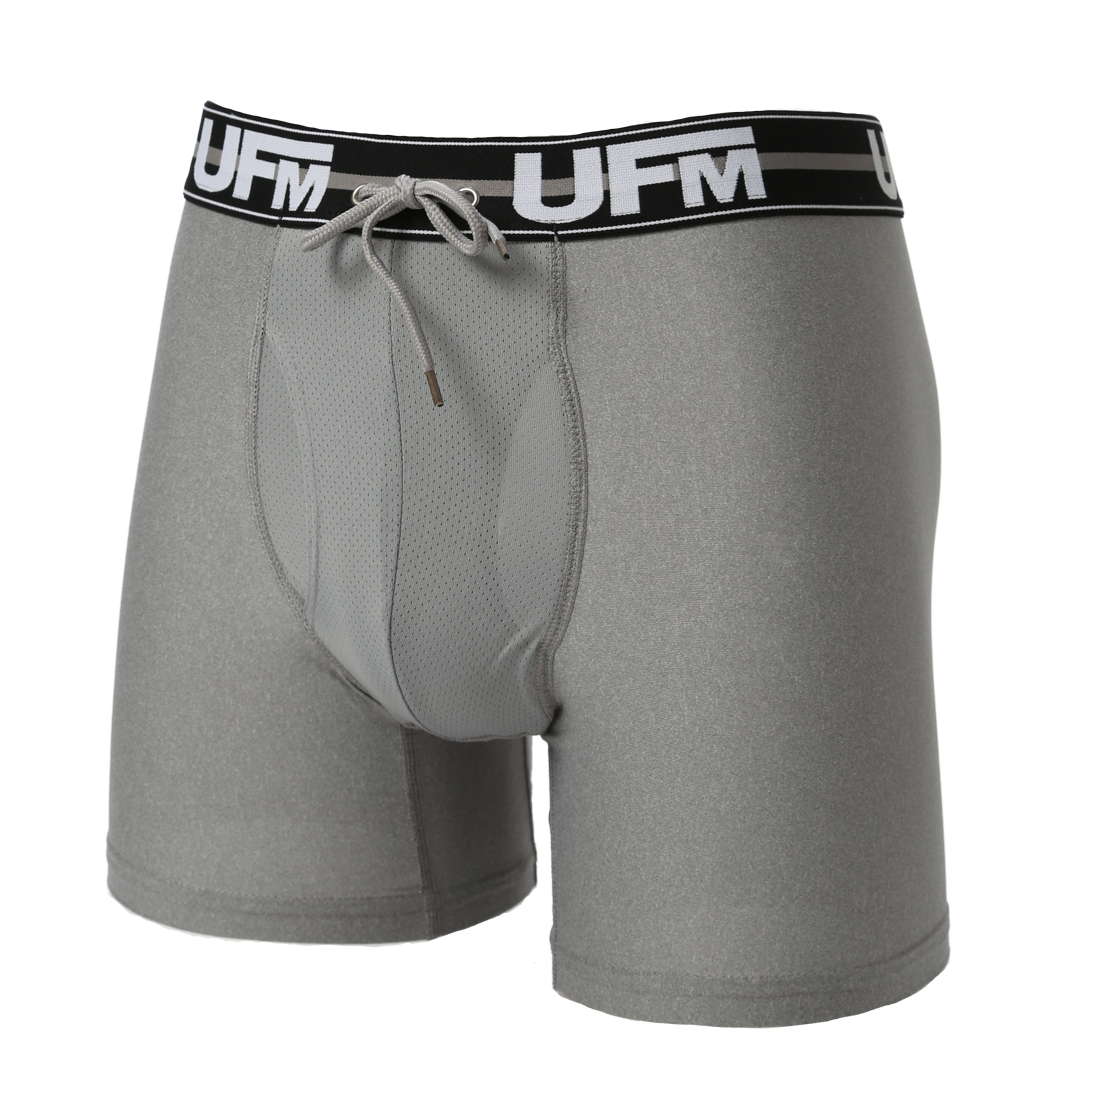 UFM Mens Polyester/Spandex 6 inch Inseam Boxer Brief Featuring UFM's  Exclusive Patented Adjustable Support Pouch, Max Support, White, 48-50 Waist